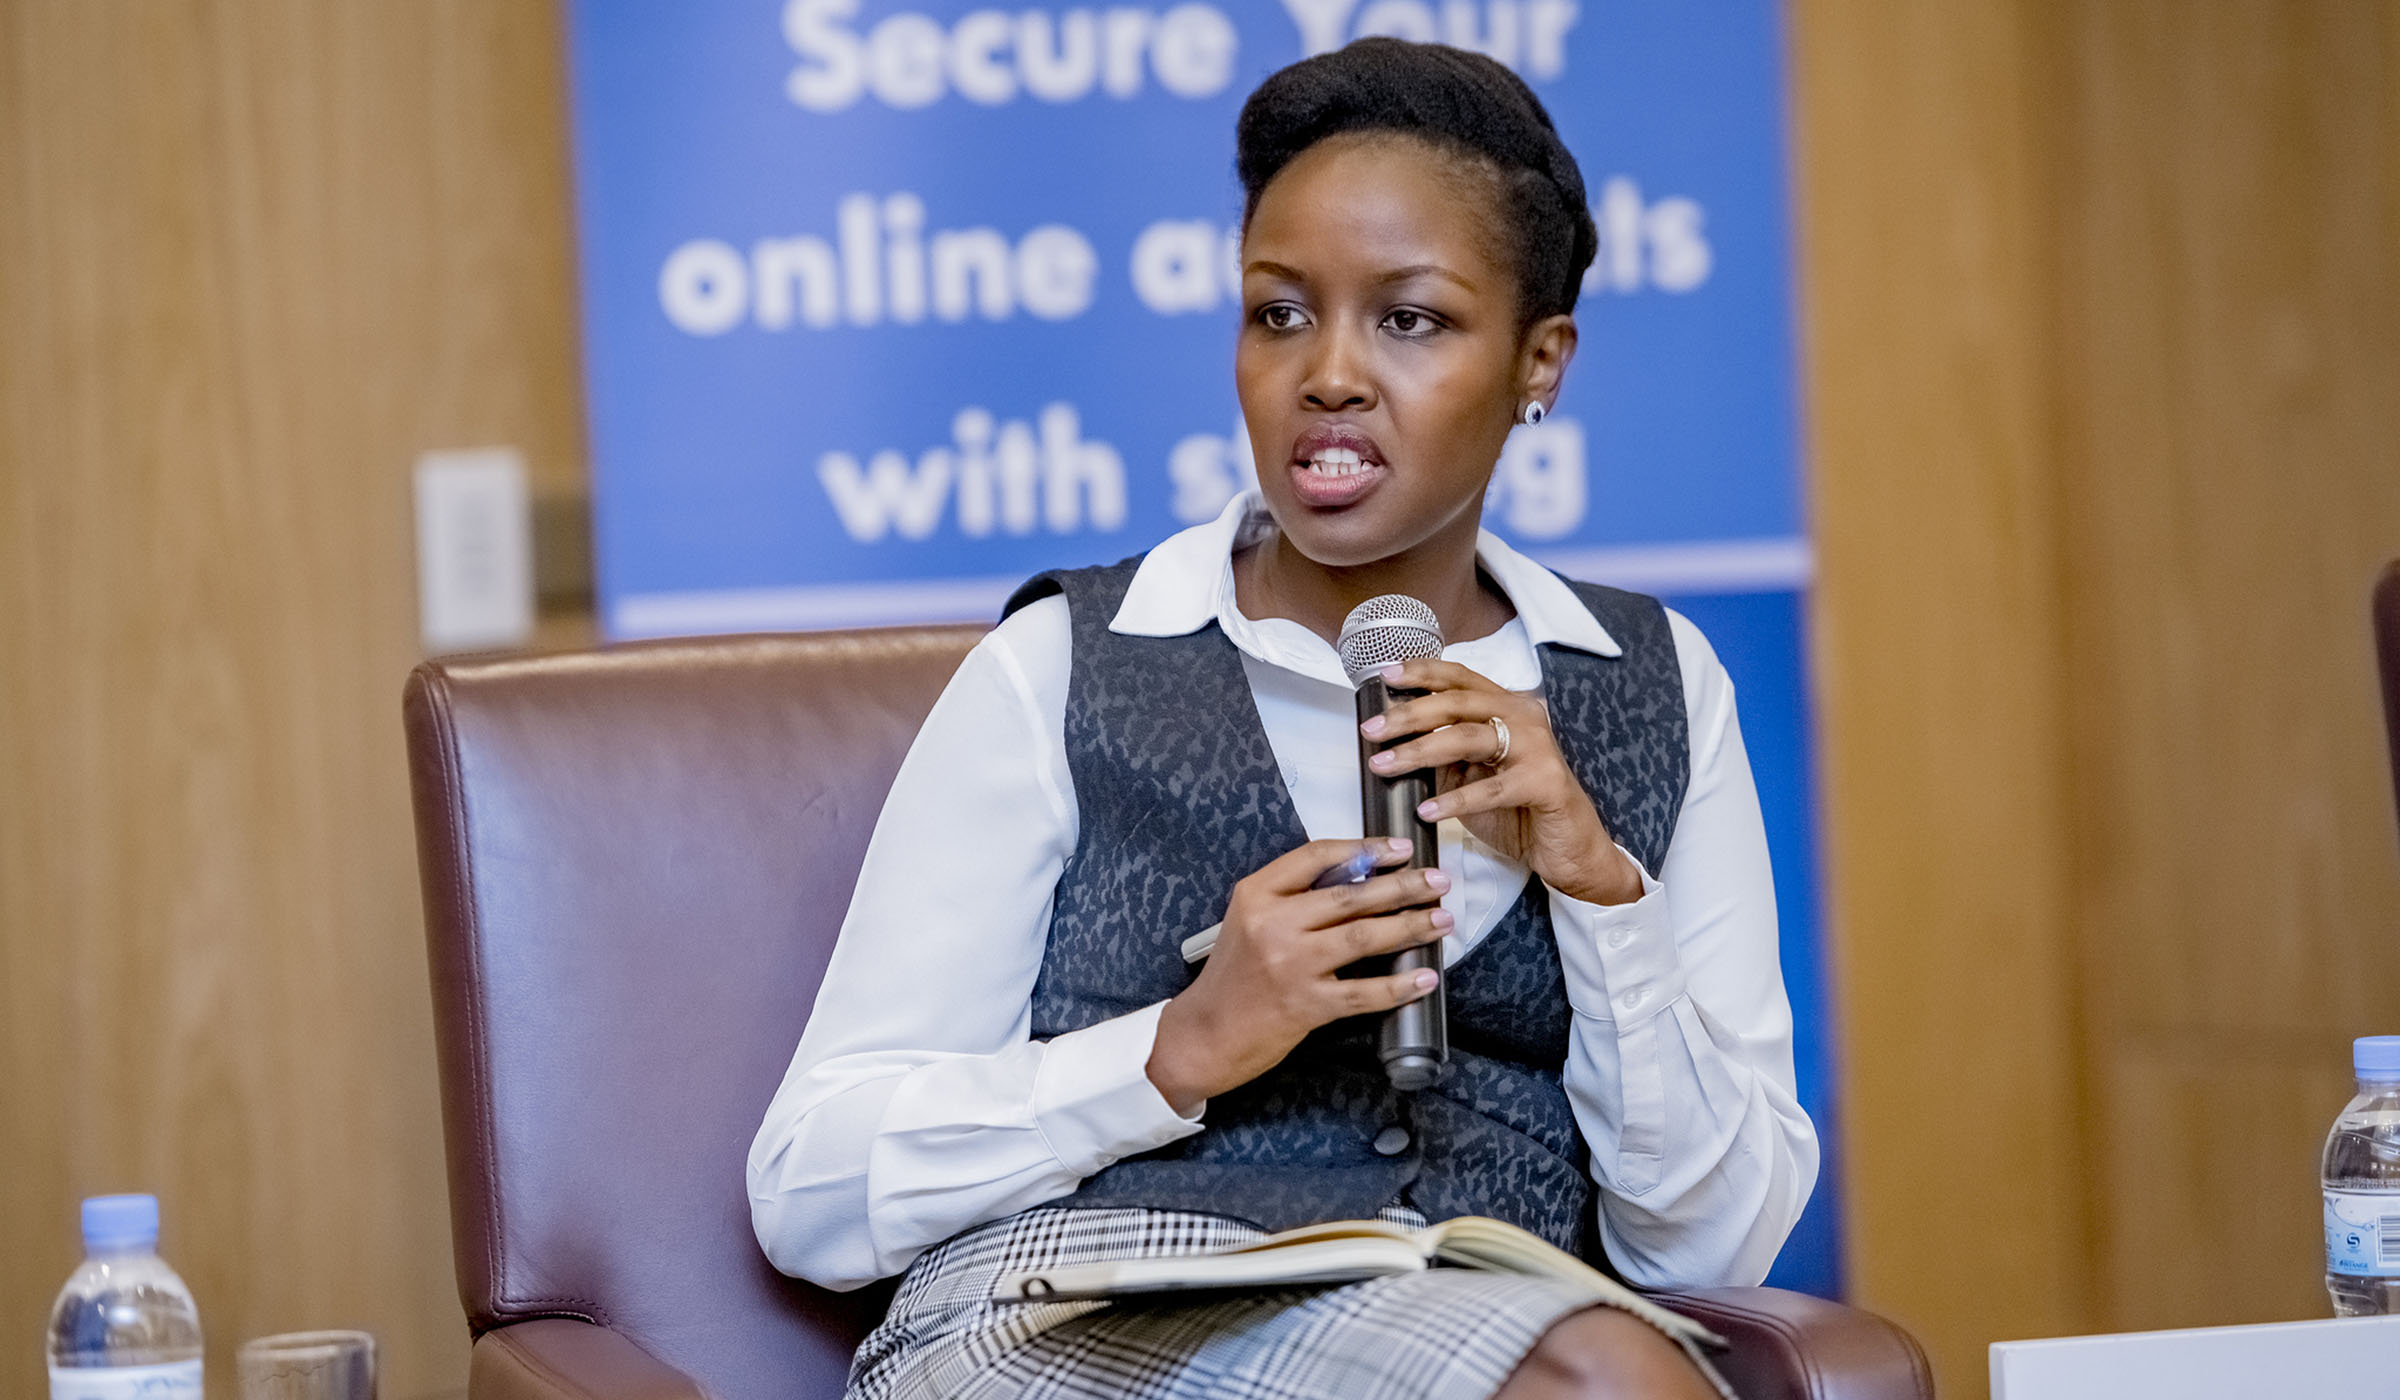 Minister Ingabire speaks on a panel during the Regional Cloud and Security Summit in Kigali last week. Courtesy.